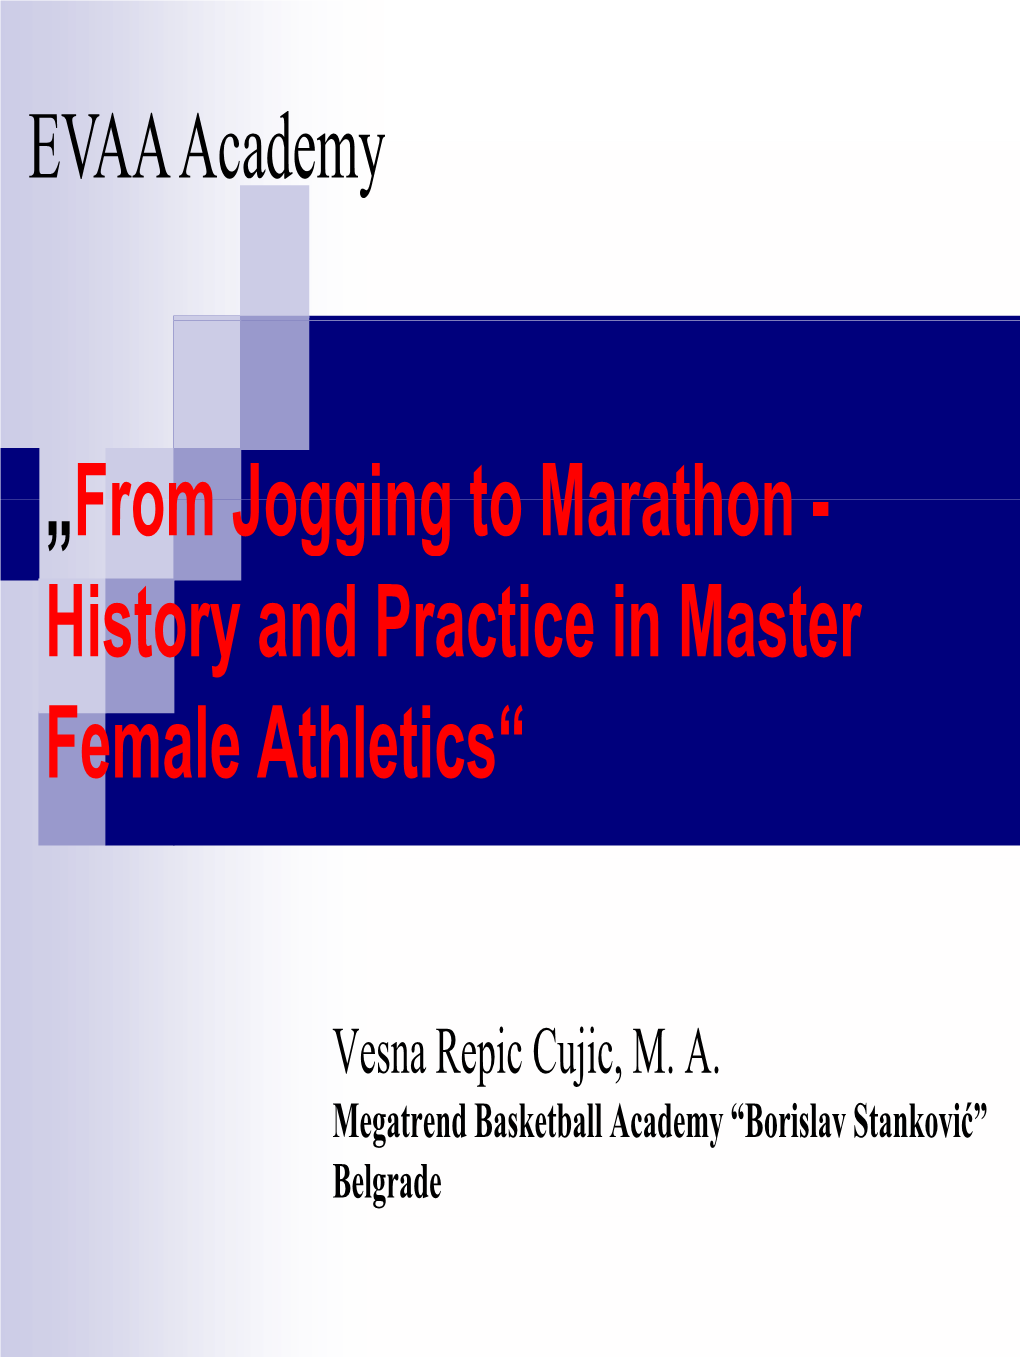 From Jogging to Marathon - History and Practice in Master Female Athletics“